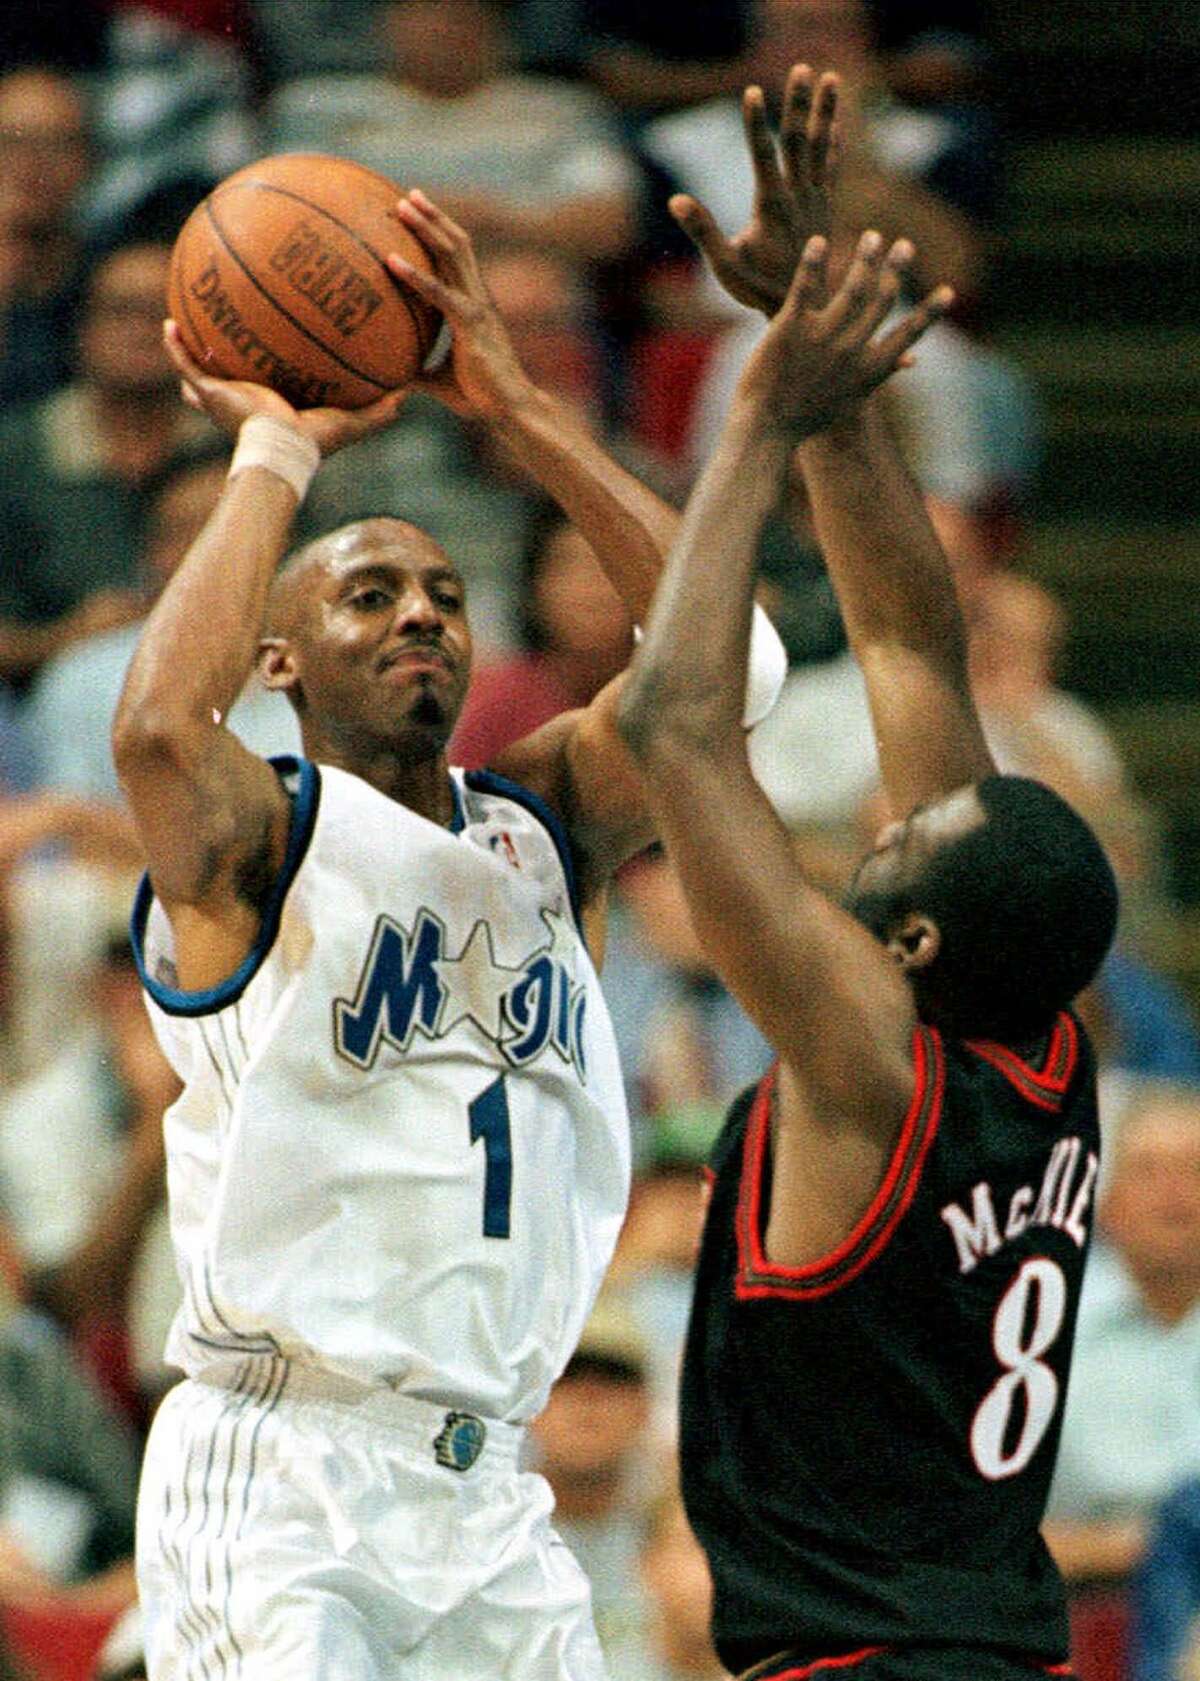 Orlando Magic guard Anfernee Hardaway (1) puts up a shot over Philadelphia 76ers guard Aaron McKie (8) during the Magic's 79-68 win Tuesday night May 11, 1999 in their Eatern Conference. Penny Hardaway met with Los Angeles Lakers executive Jerry West recently, fueling speculation the unrestricted free-agent guard might be reunited with former teammate Shaquille O'Neal. (AP Photo/Steve Simoneau)